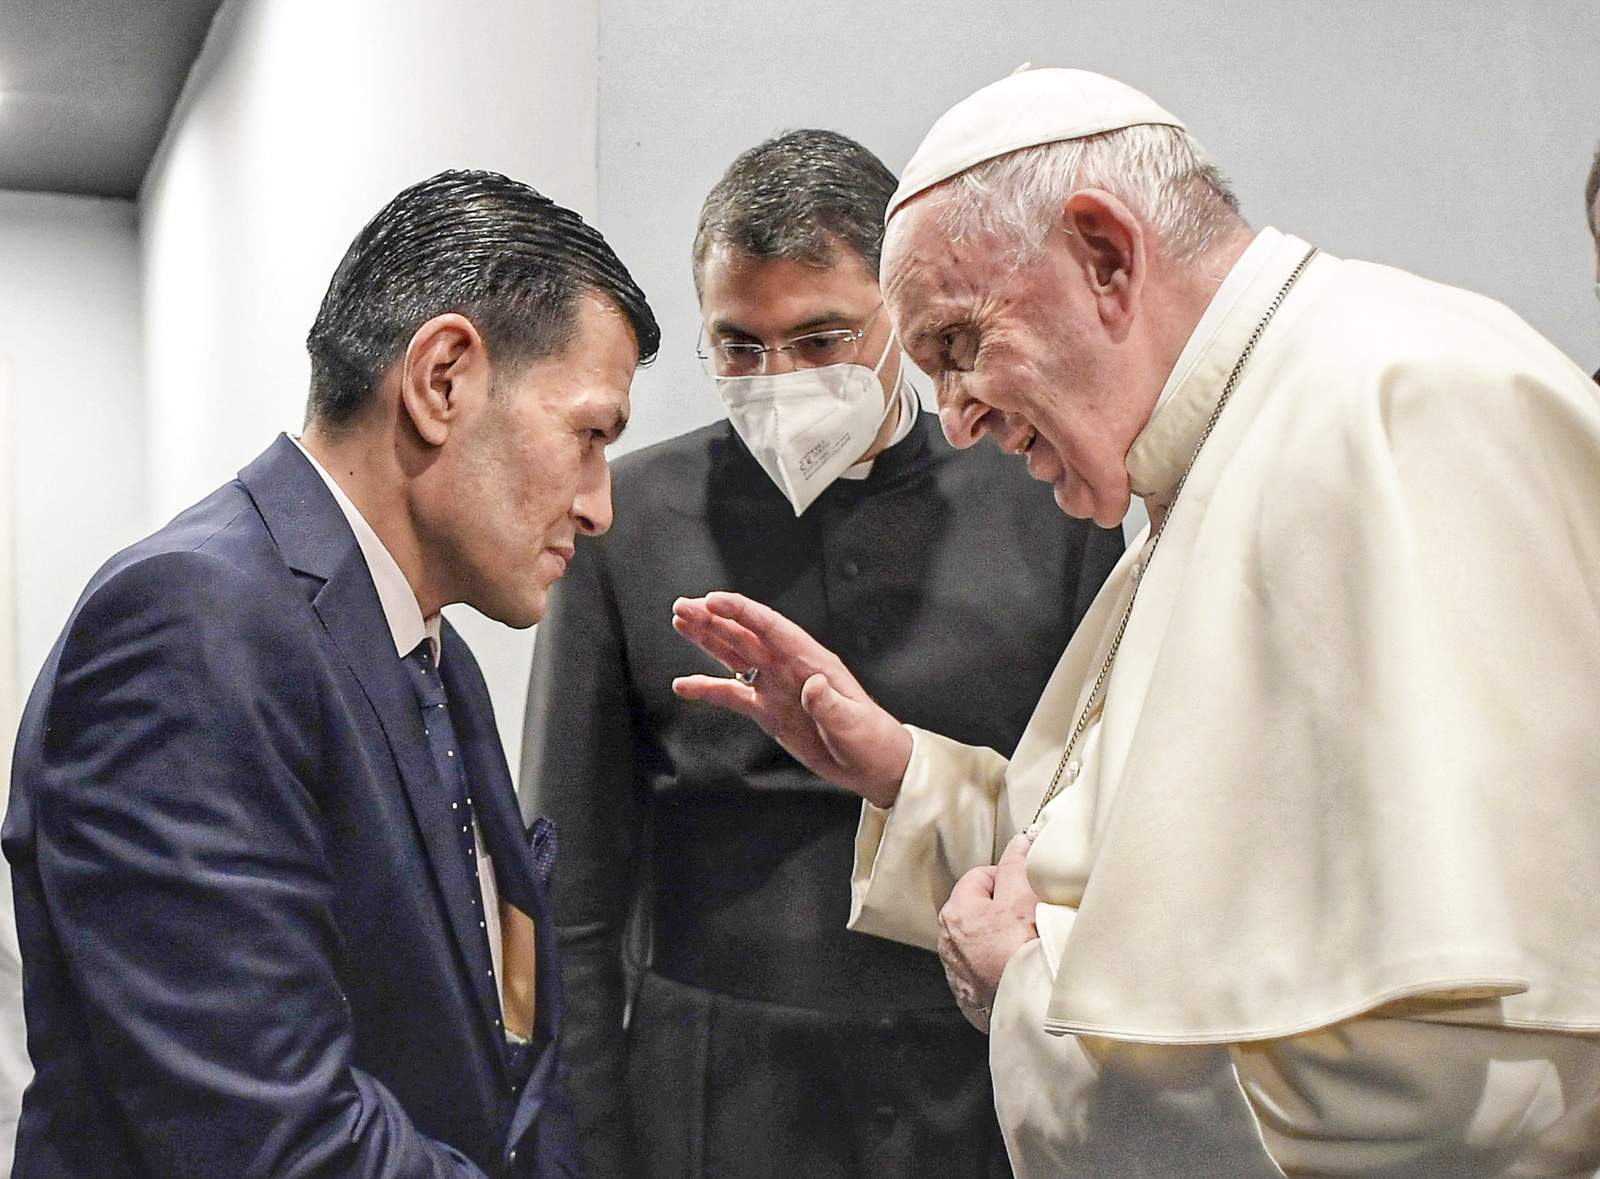 The Latest: Pope meets father of drowned Syrian refugee boy